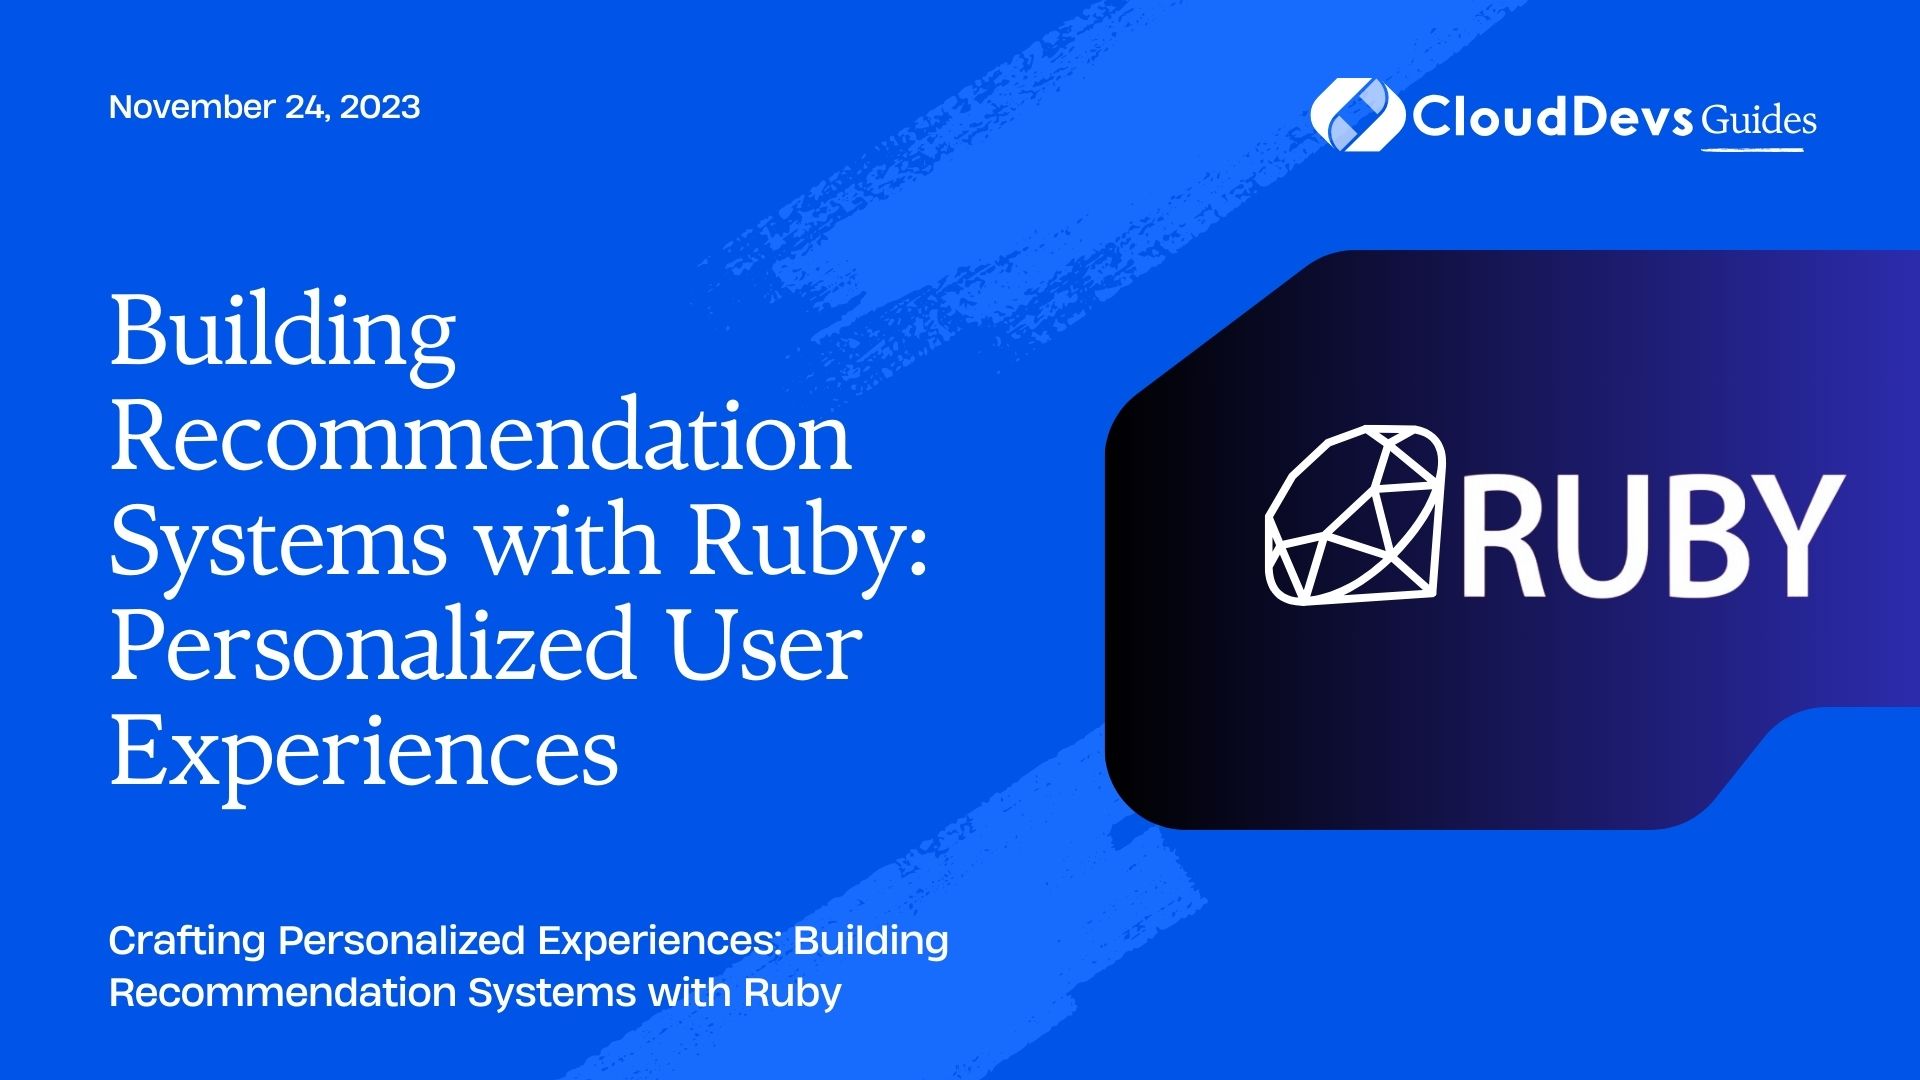 Building Recommendation Systems with Ruby: Personalized User Experiences